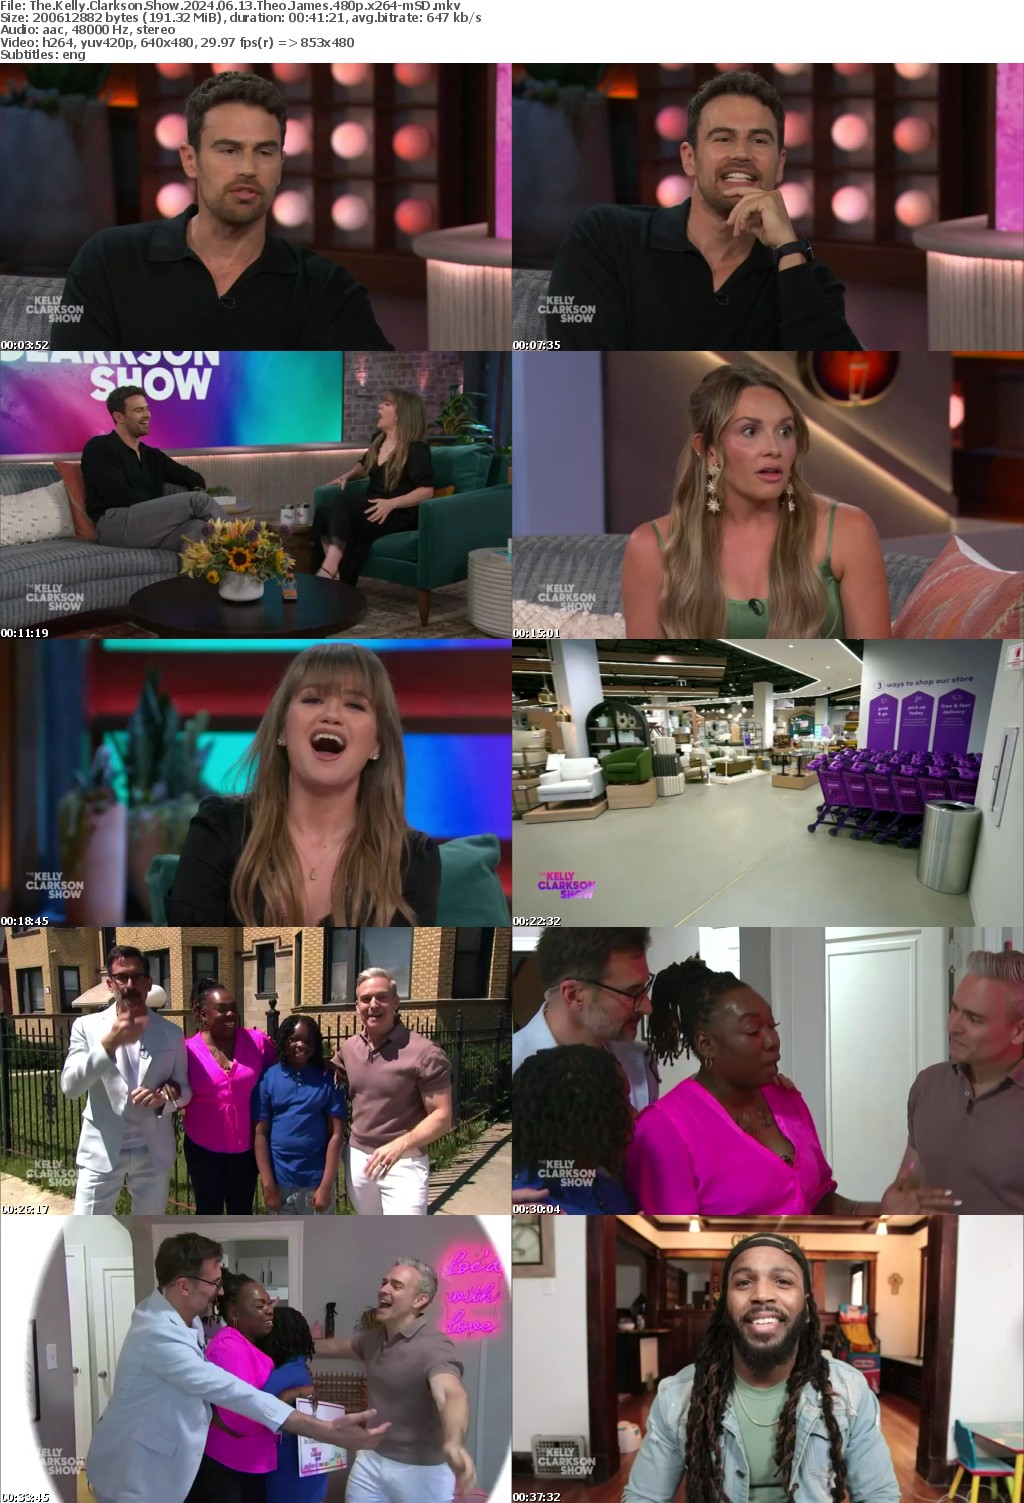 The Kelly Clarkson Show 2024 06 13 Theo James 480p x264-mSD